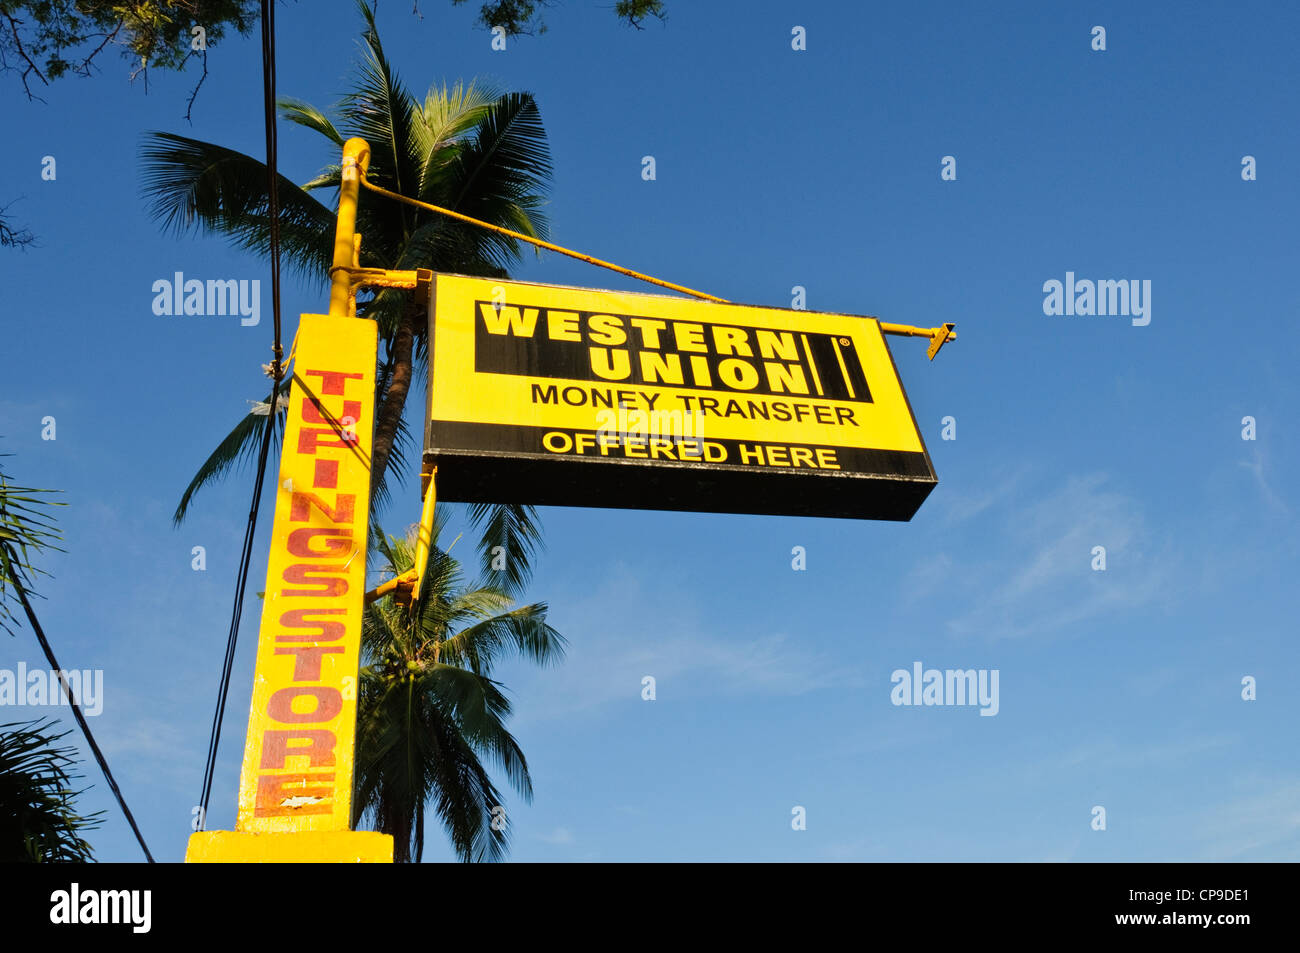 Sign post Western Union Money Transfer offered here, blue sky, coconut  palms - Sabang Puerto Galera Philippines Southeast Asia Stock Photo - Alamy